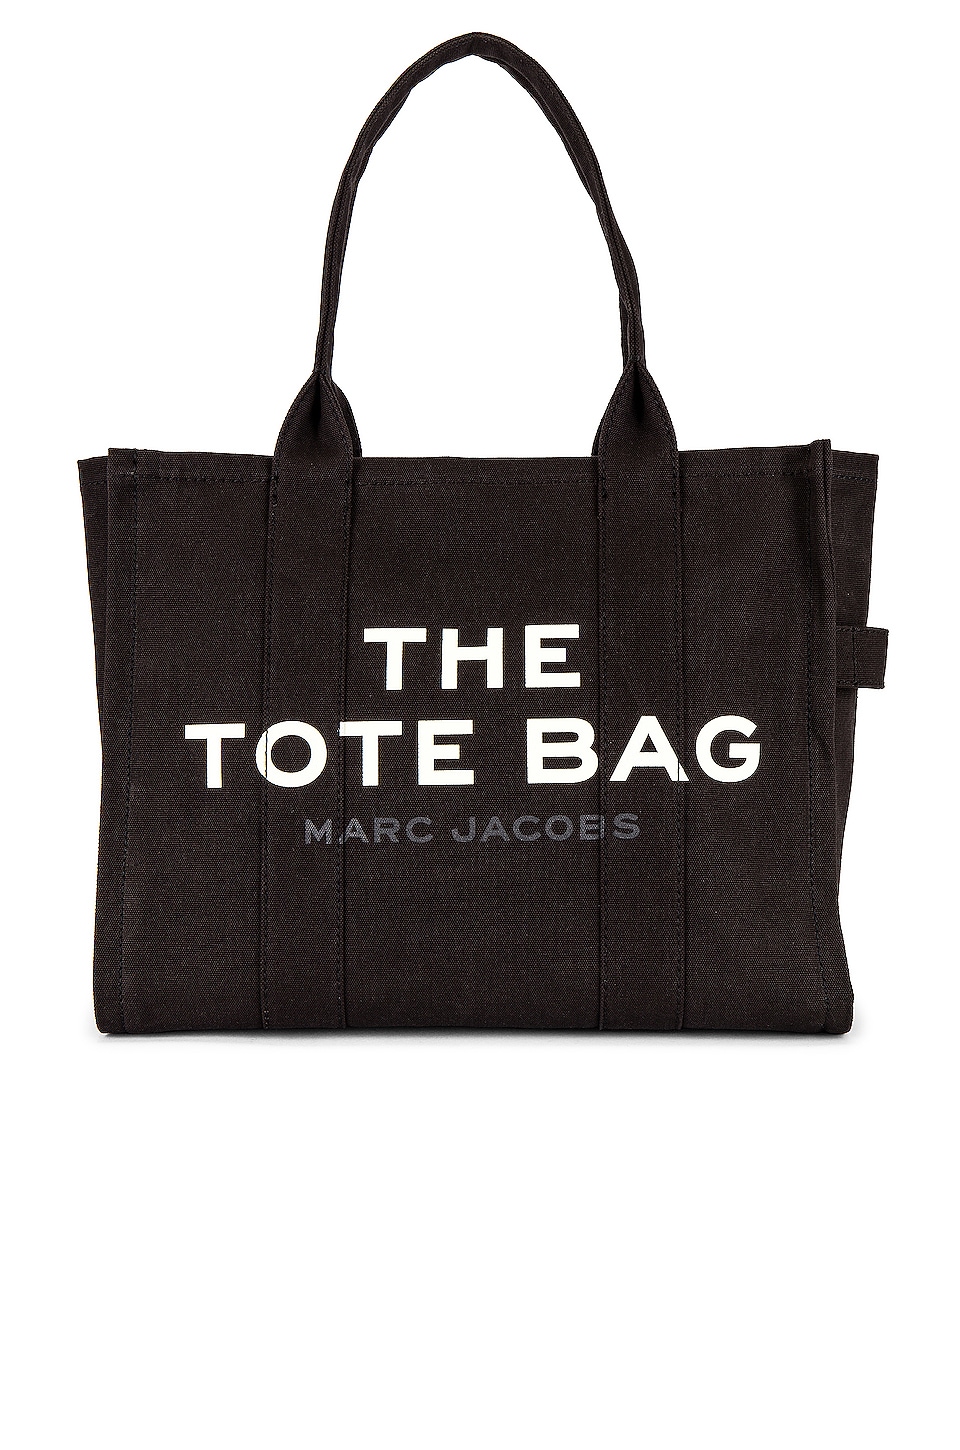 The Large Canvas Tote Bag in Beige - Marc Jacobs